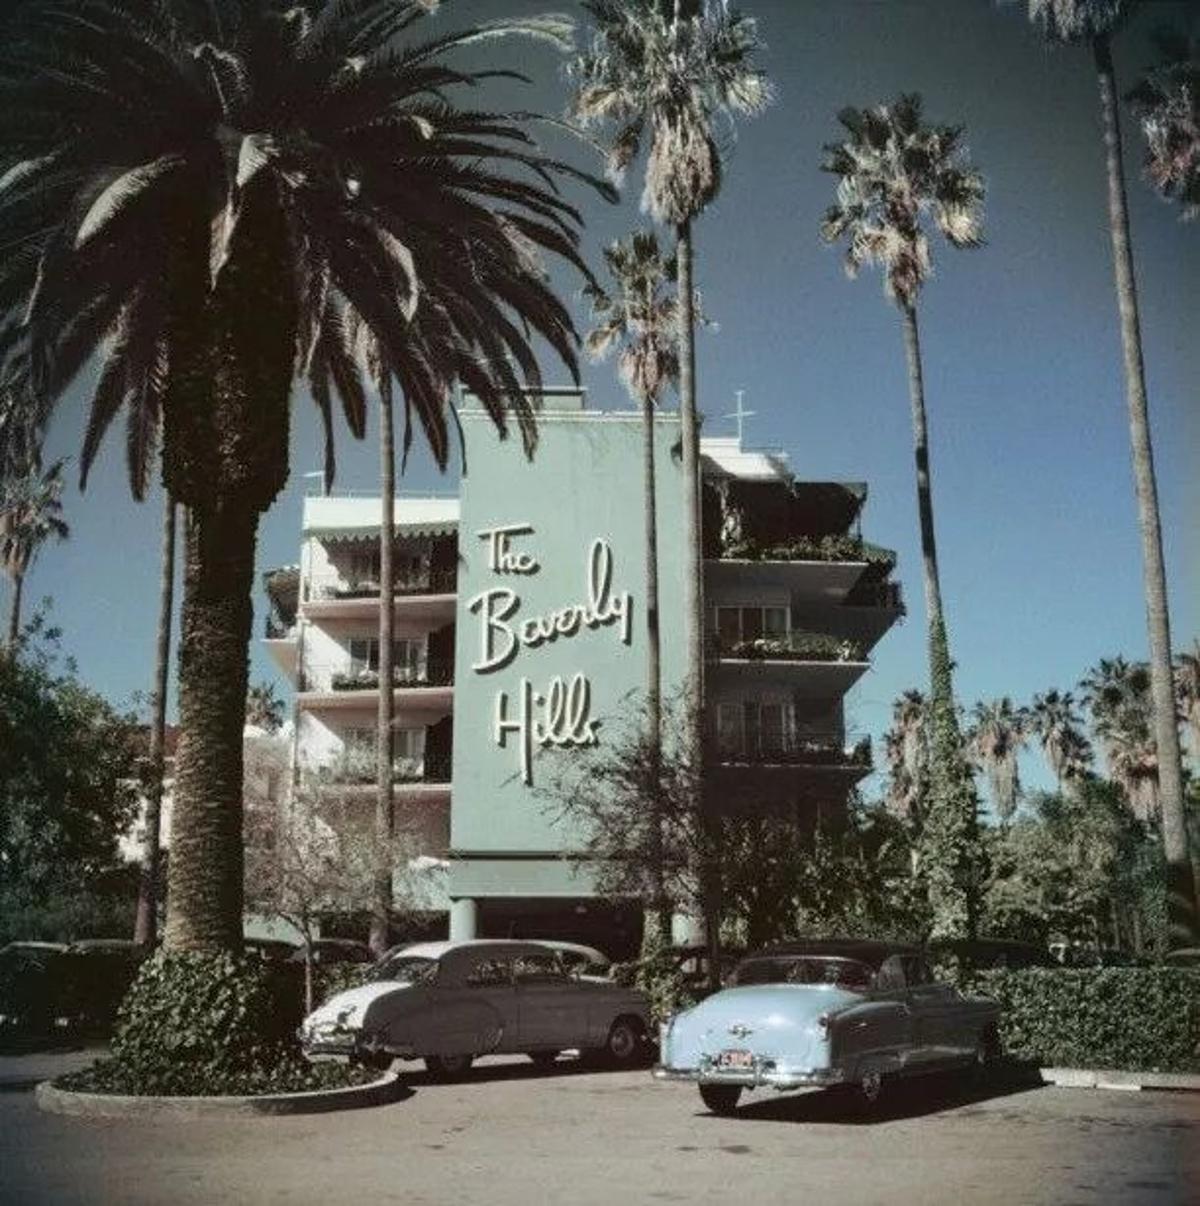 Beverly Hills Hotel 
1957
by Slim Aarons

printed 2023
Slim Aarons Limited Estate Edition

Cars parked outside the Beverly Hills Hotel on Sunset Boulevard in California, 1957

unframed
c type print

numbered in ink on the front

Limited to 150